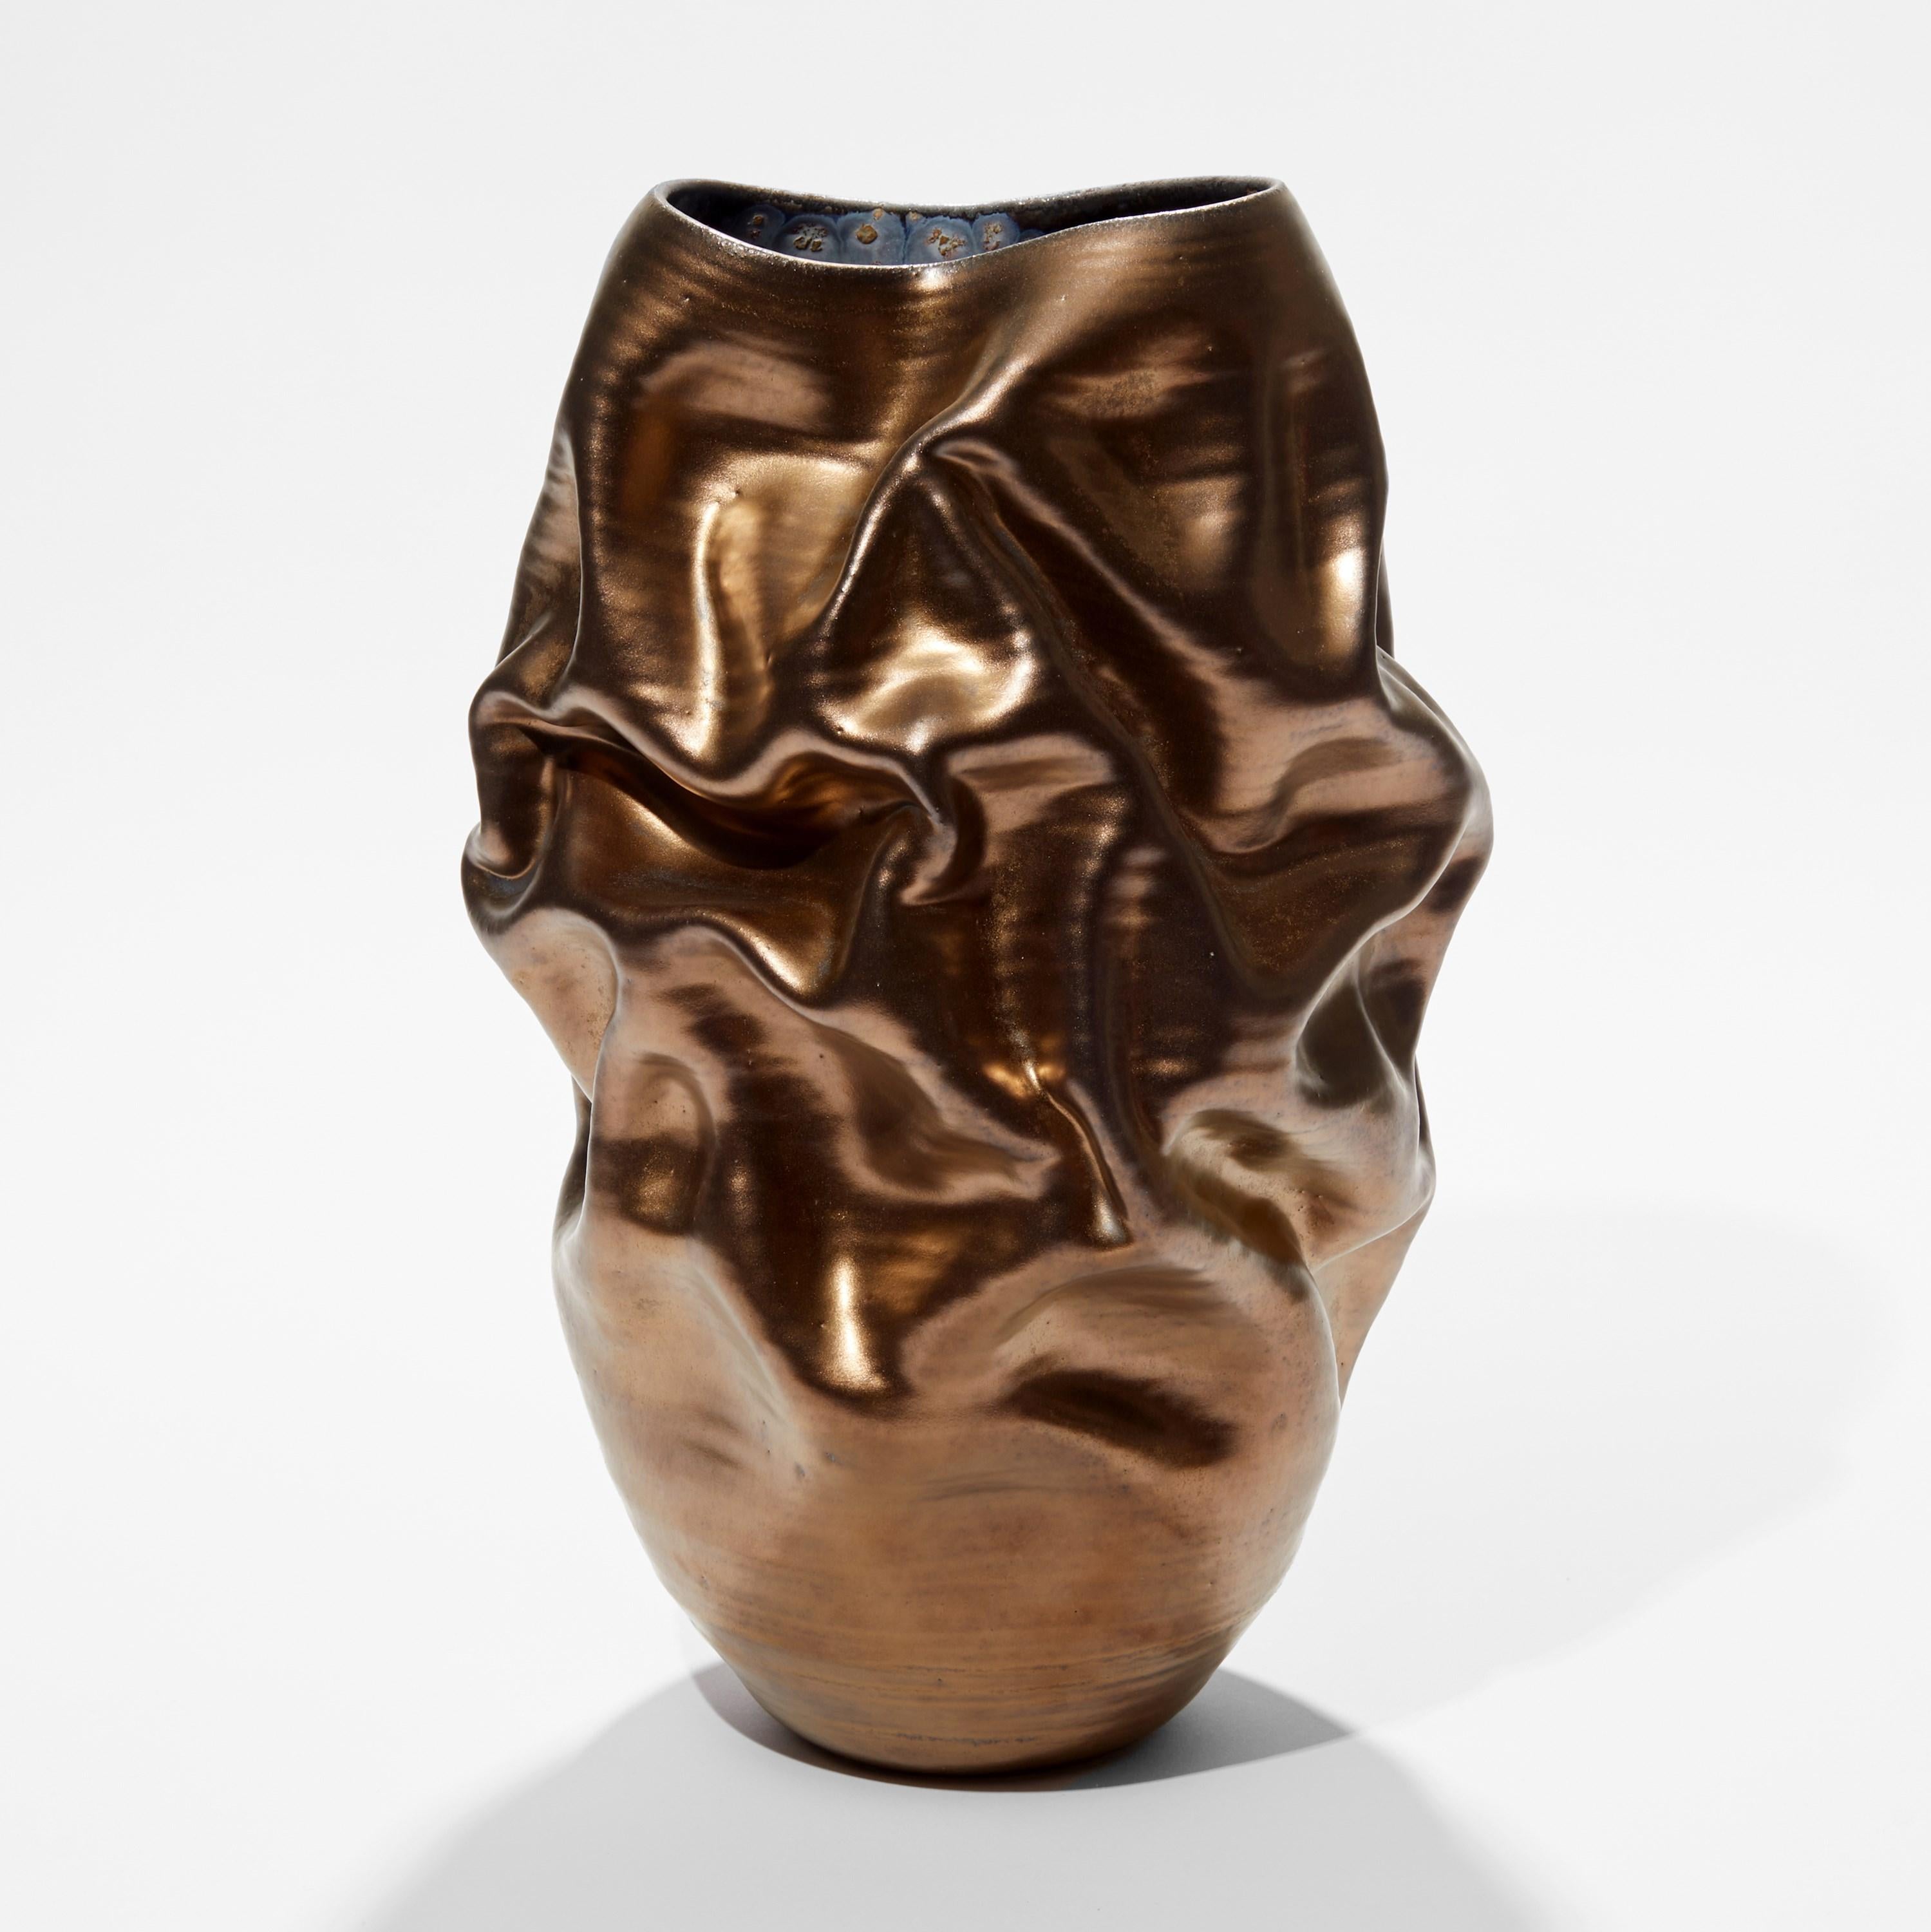 ‘Tall Gold Crumpled Form No 96’ is a unique sculptural vessel by the British artist, Nicholas Arroyave-Portela.

Nicholas Arroyave-Portela’s professional ceramic practise began in 1994. After 20 years based in London, he moved and set up his